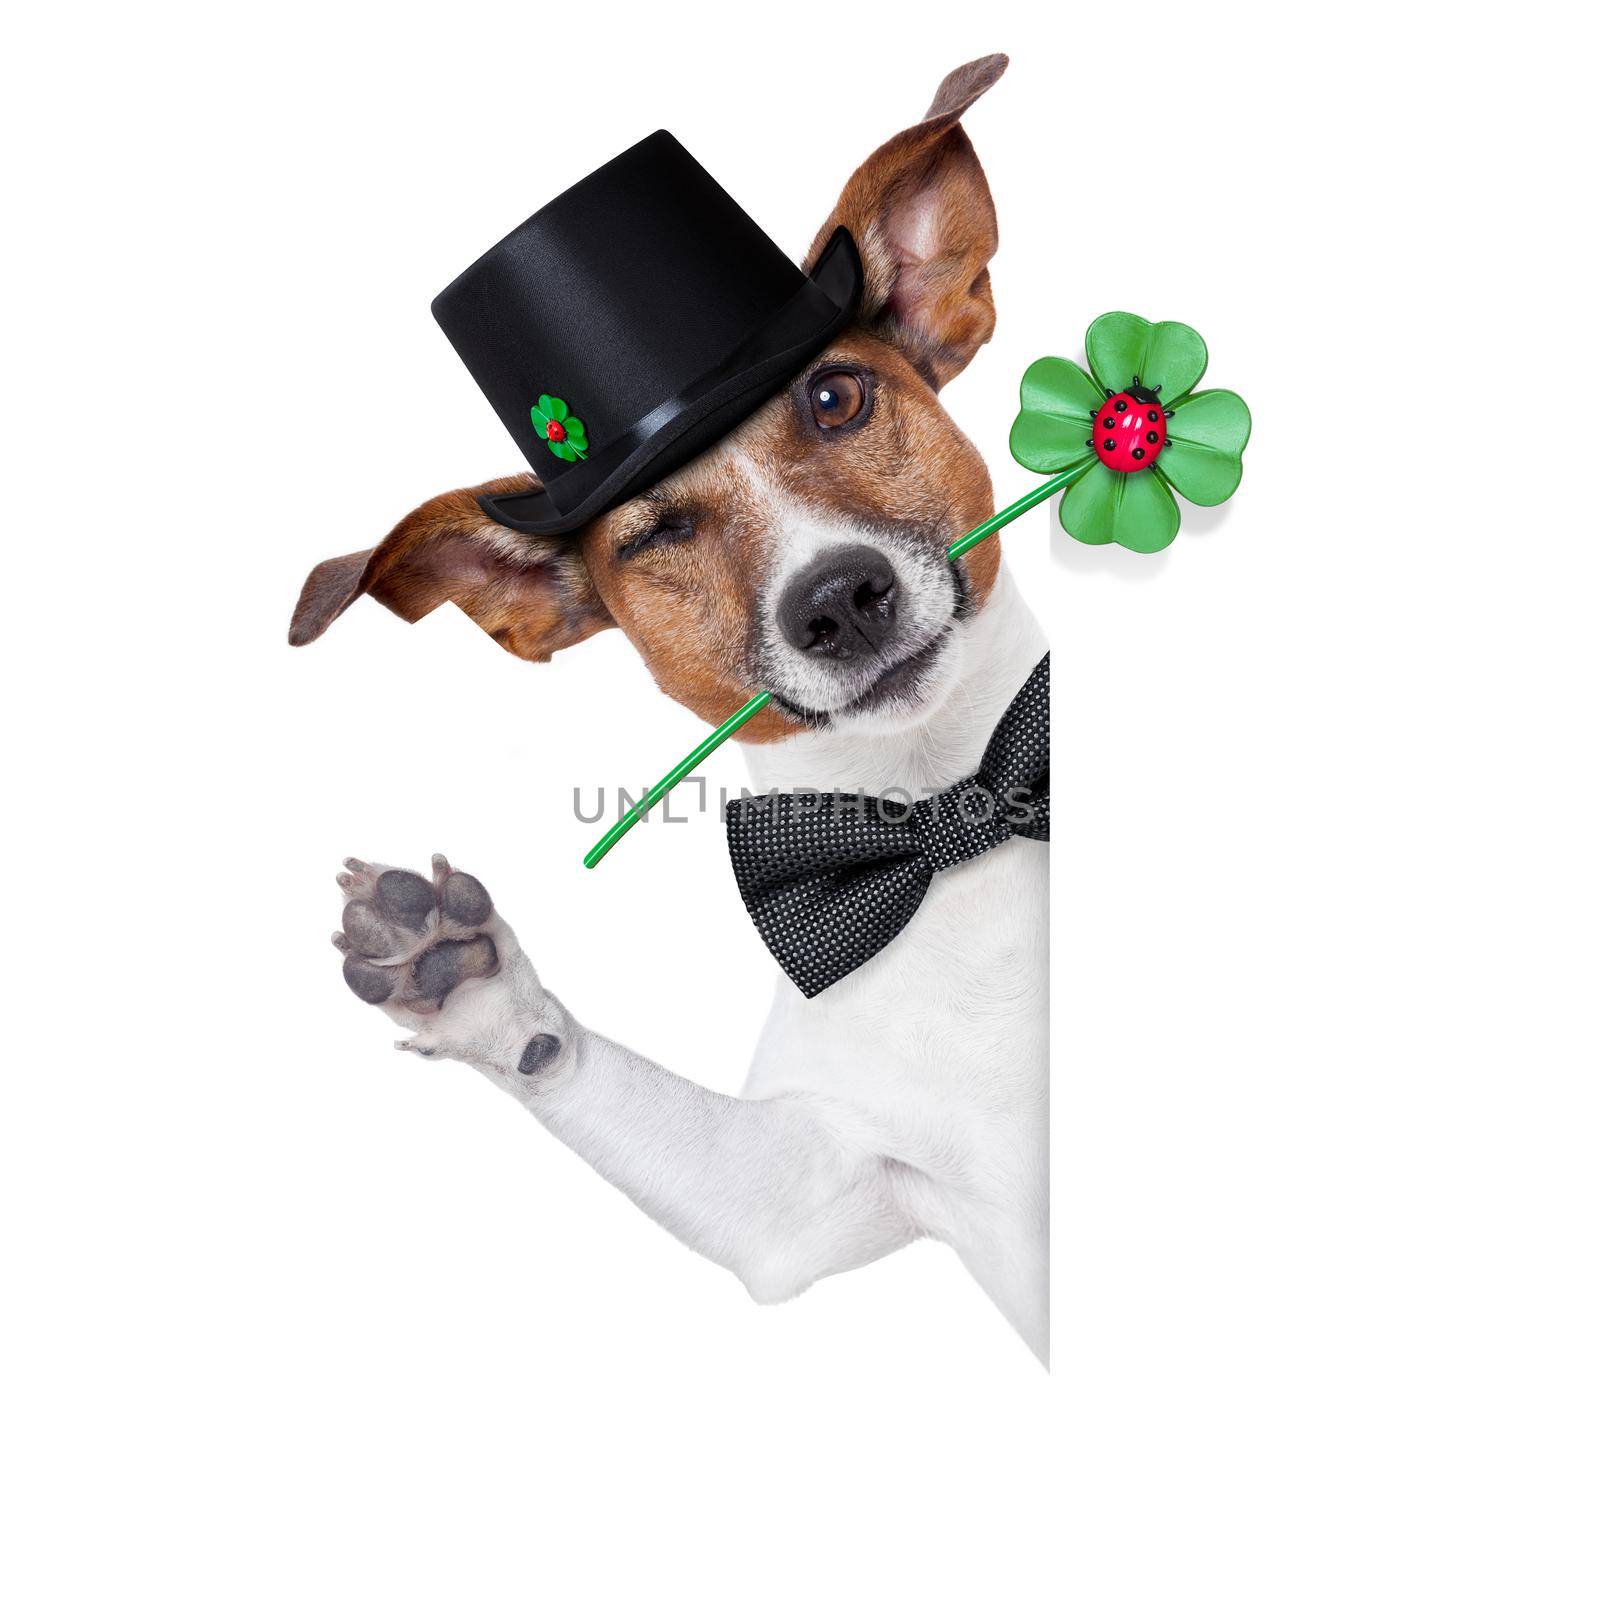 good luck chimney sweeper dog with hat and clover behind a blank banner